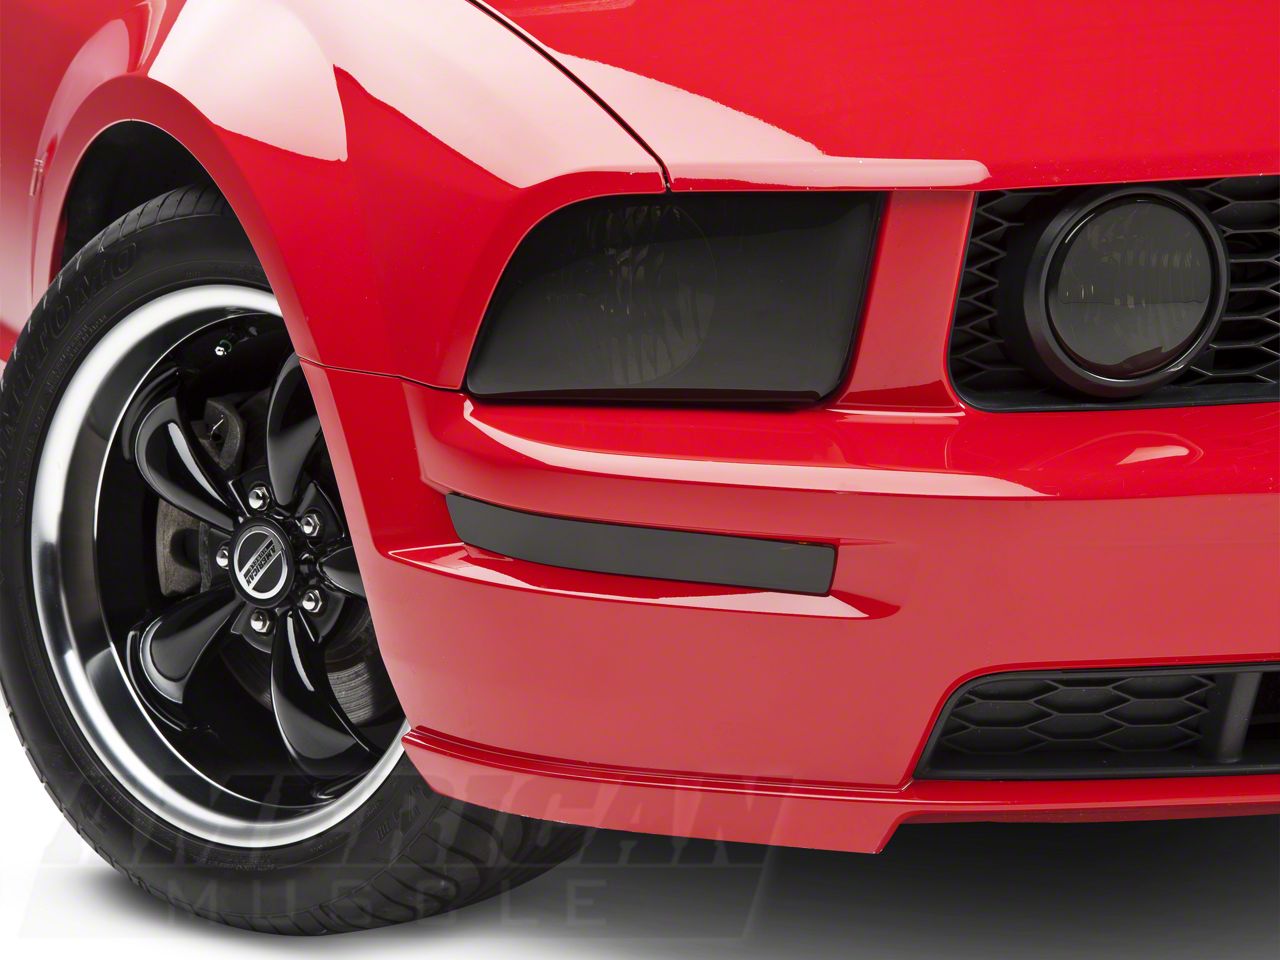 SpeedForm Mustang Headlight Covers; Smoked 80100 (05-09 Mustang GT, V6) -  Free Shipping